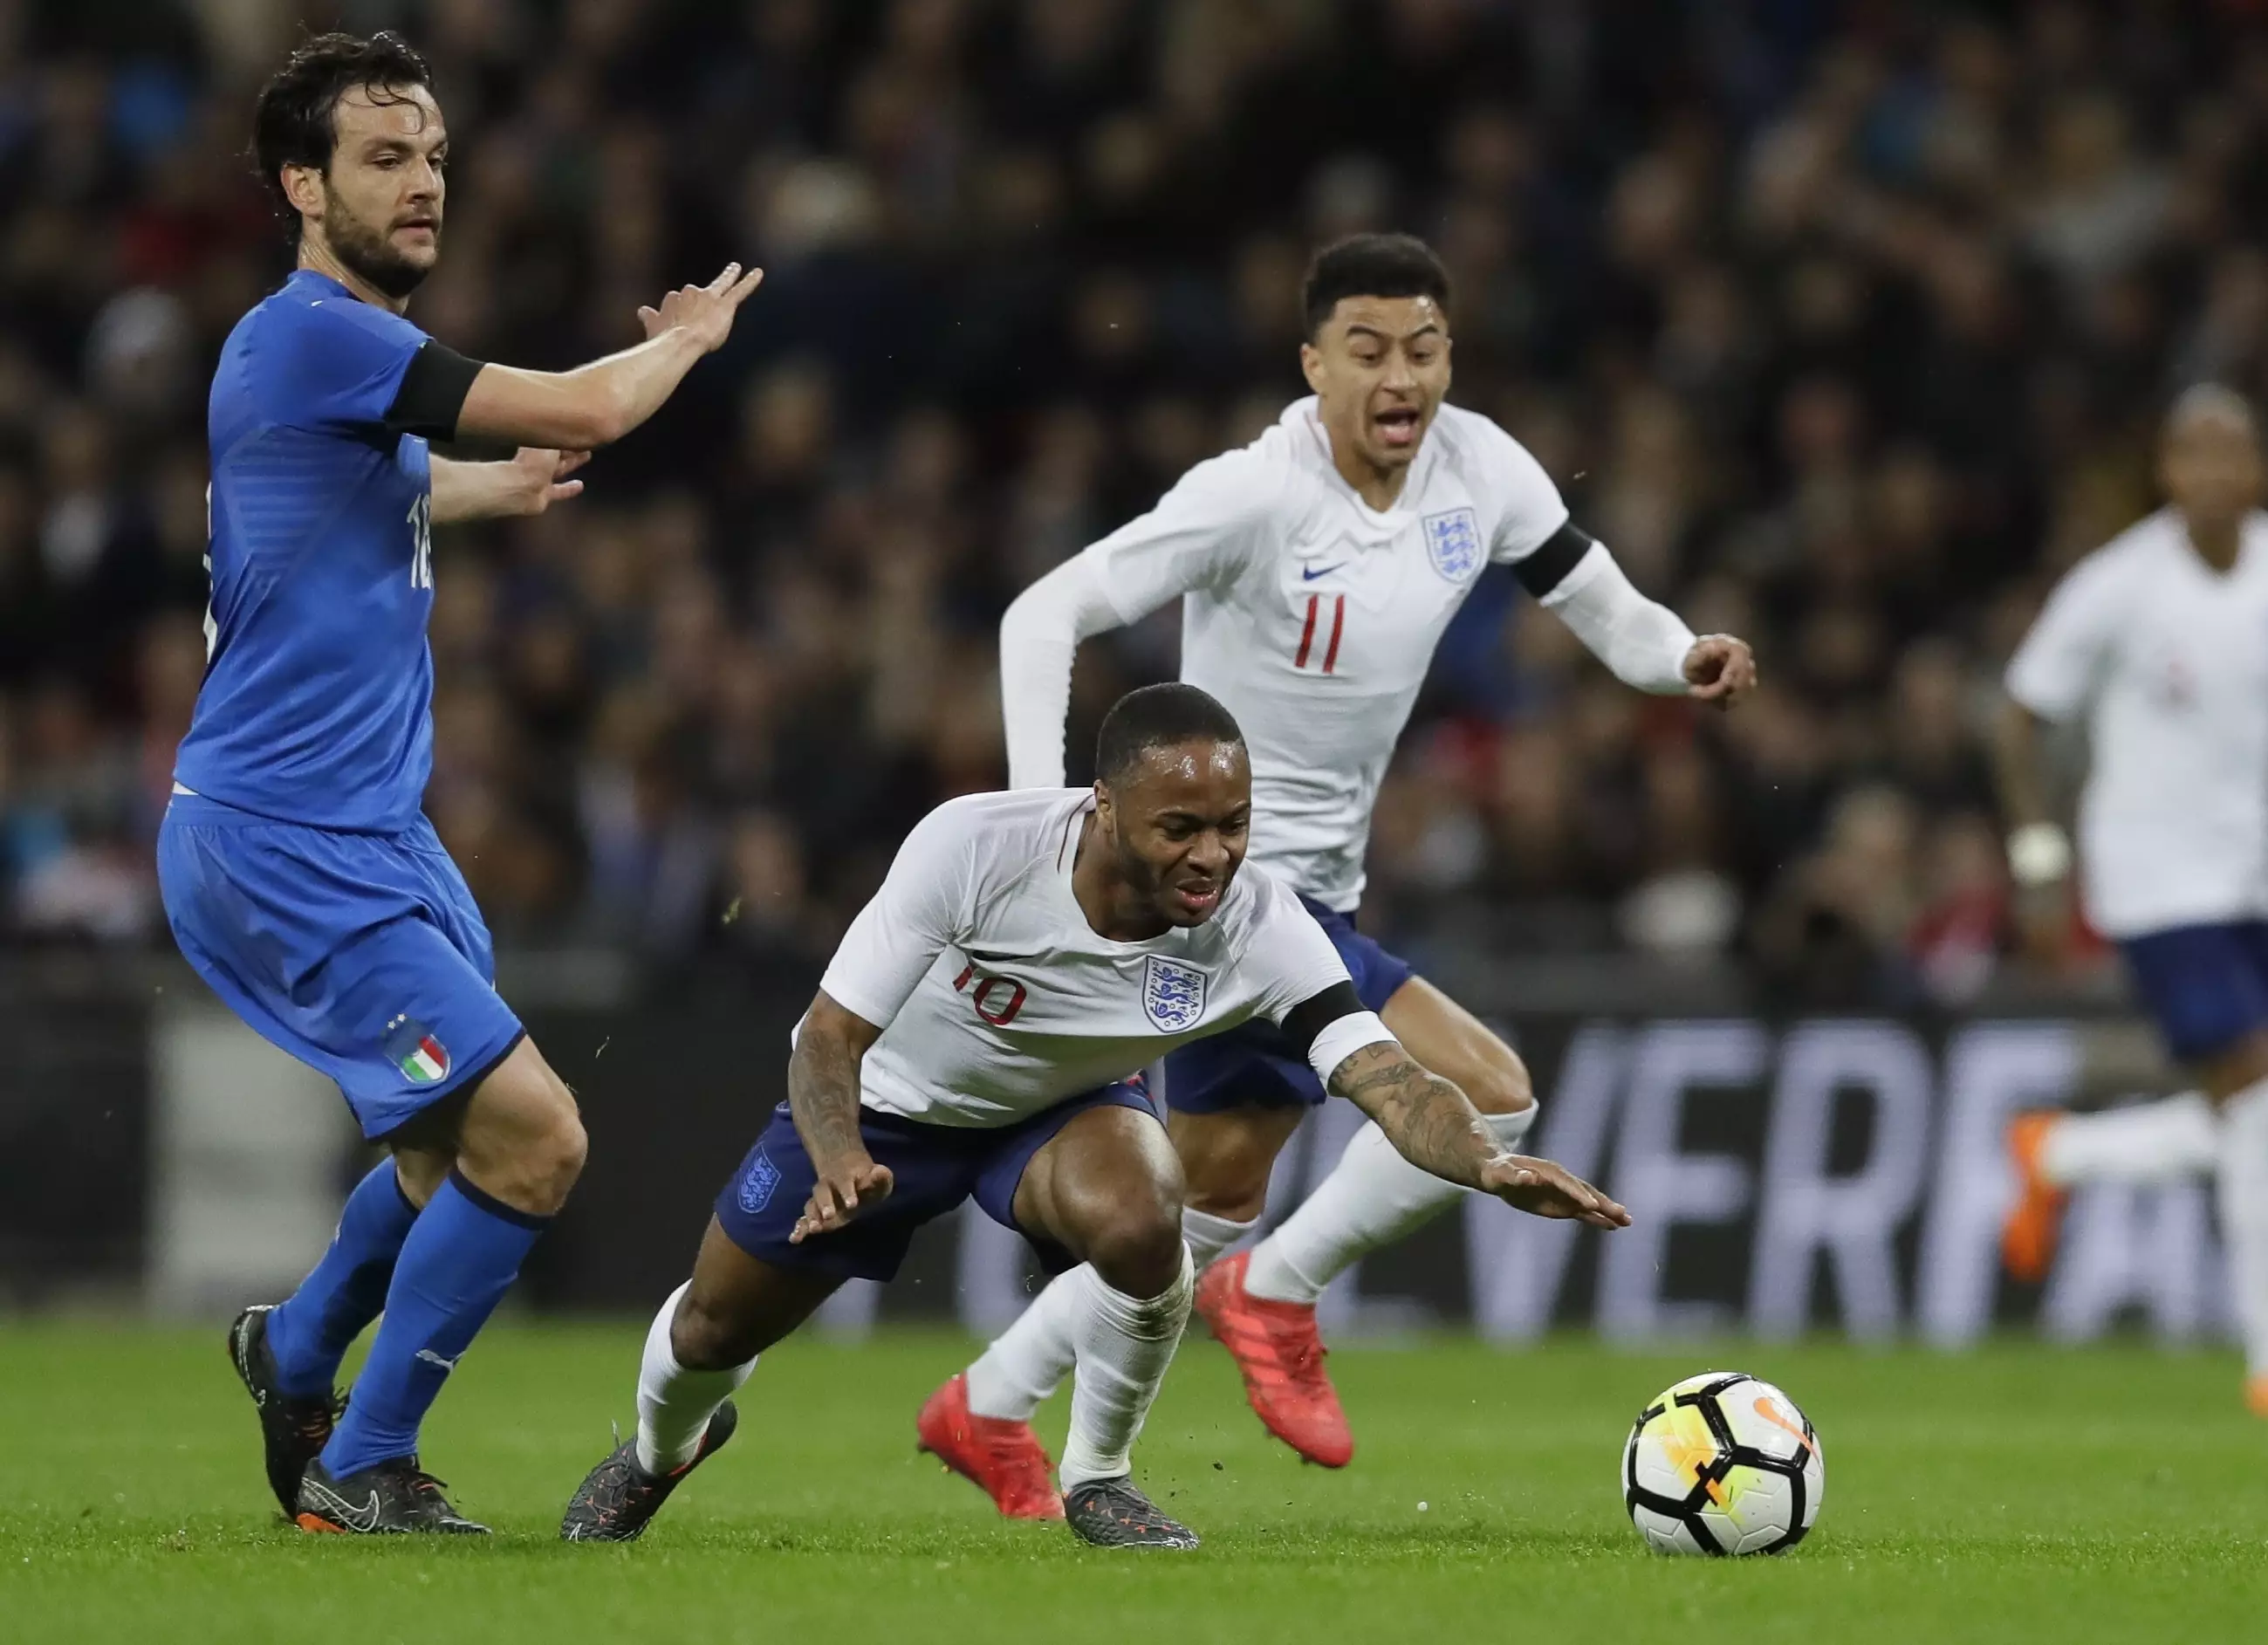 Lingard and Sterling in action for England. Image: PA